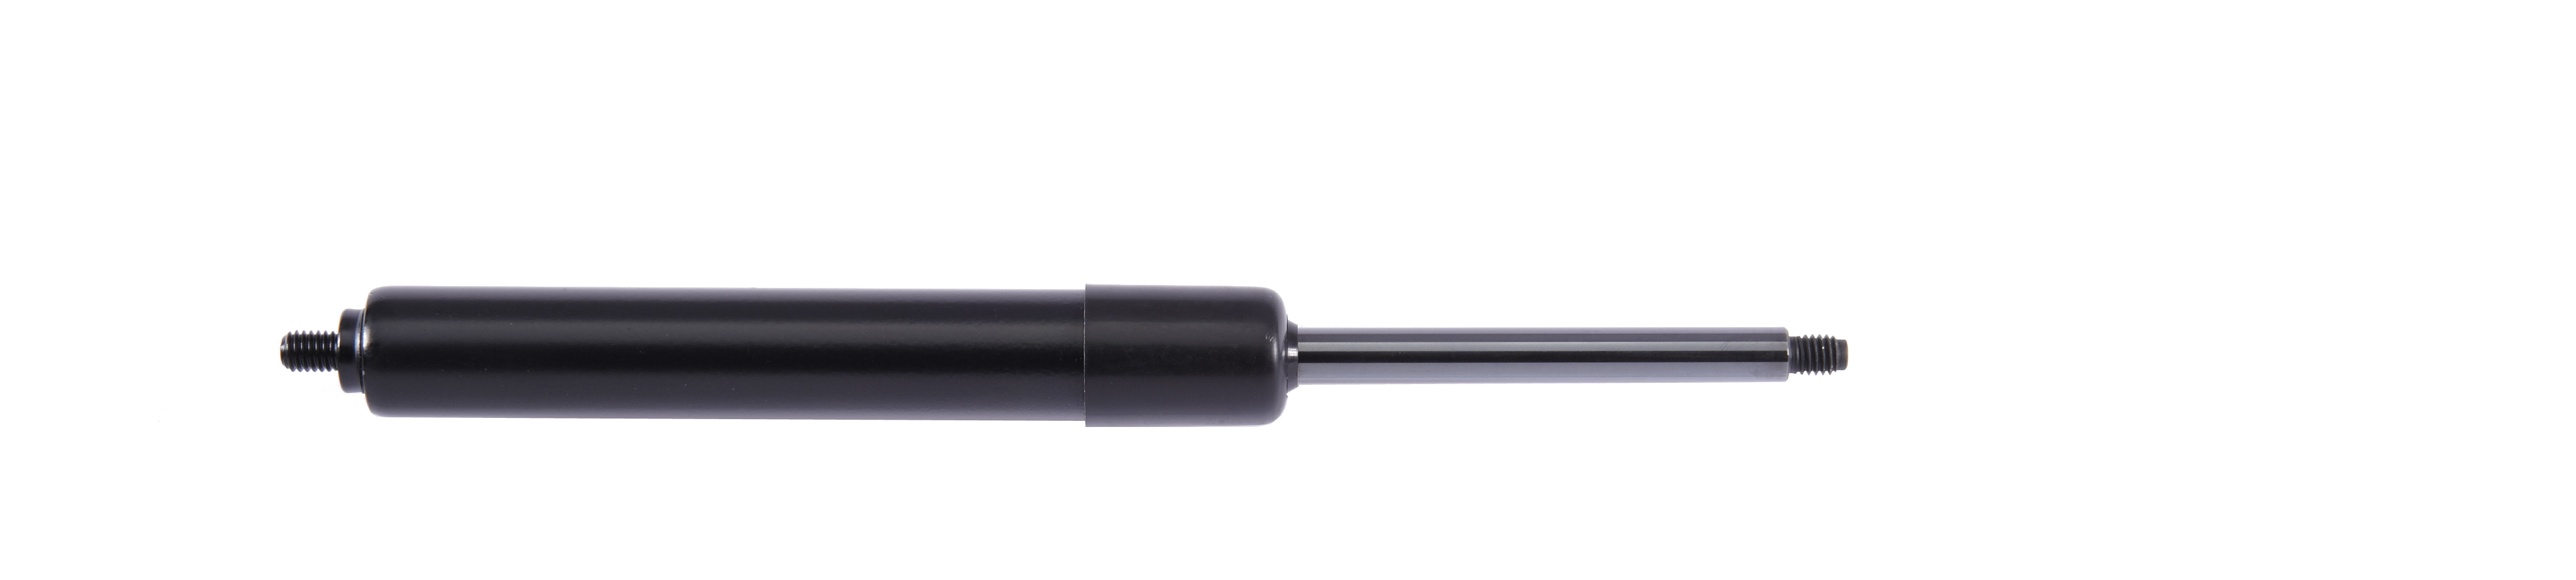 Gas spring with protective cap